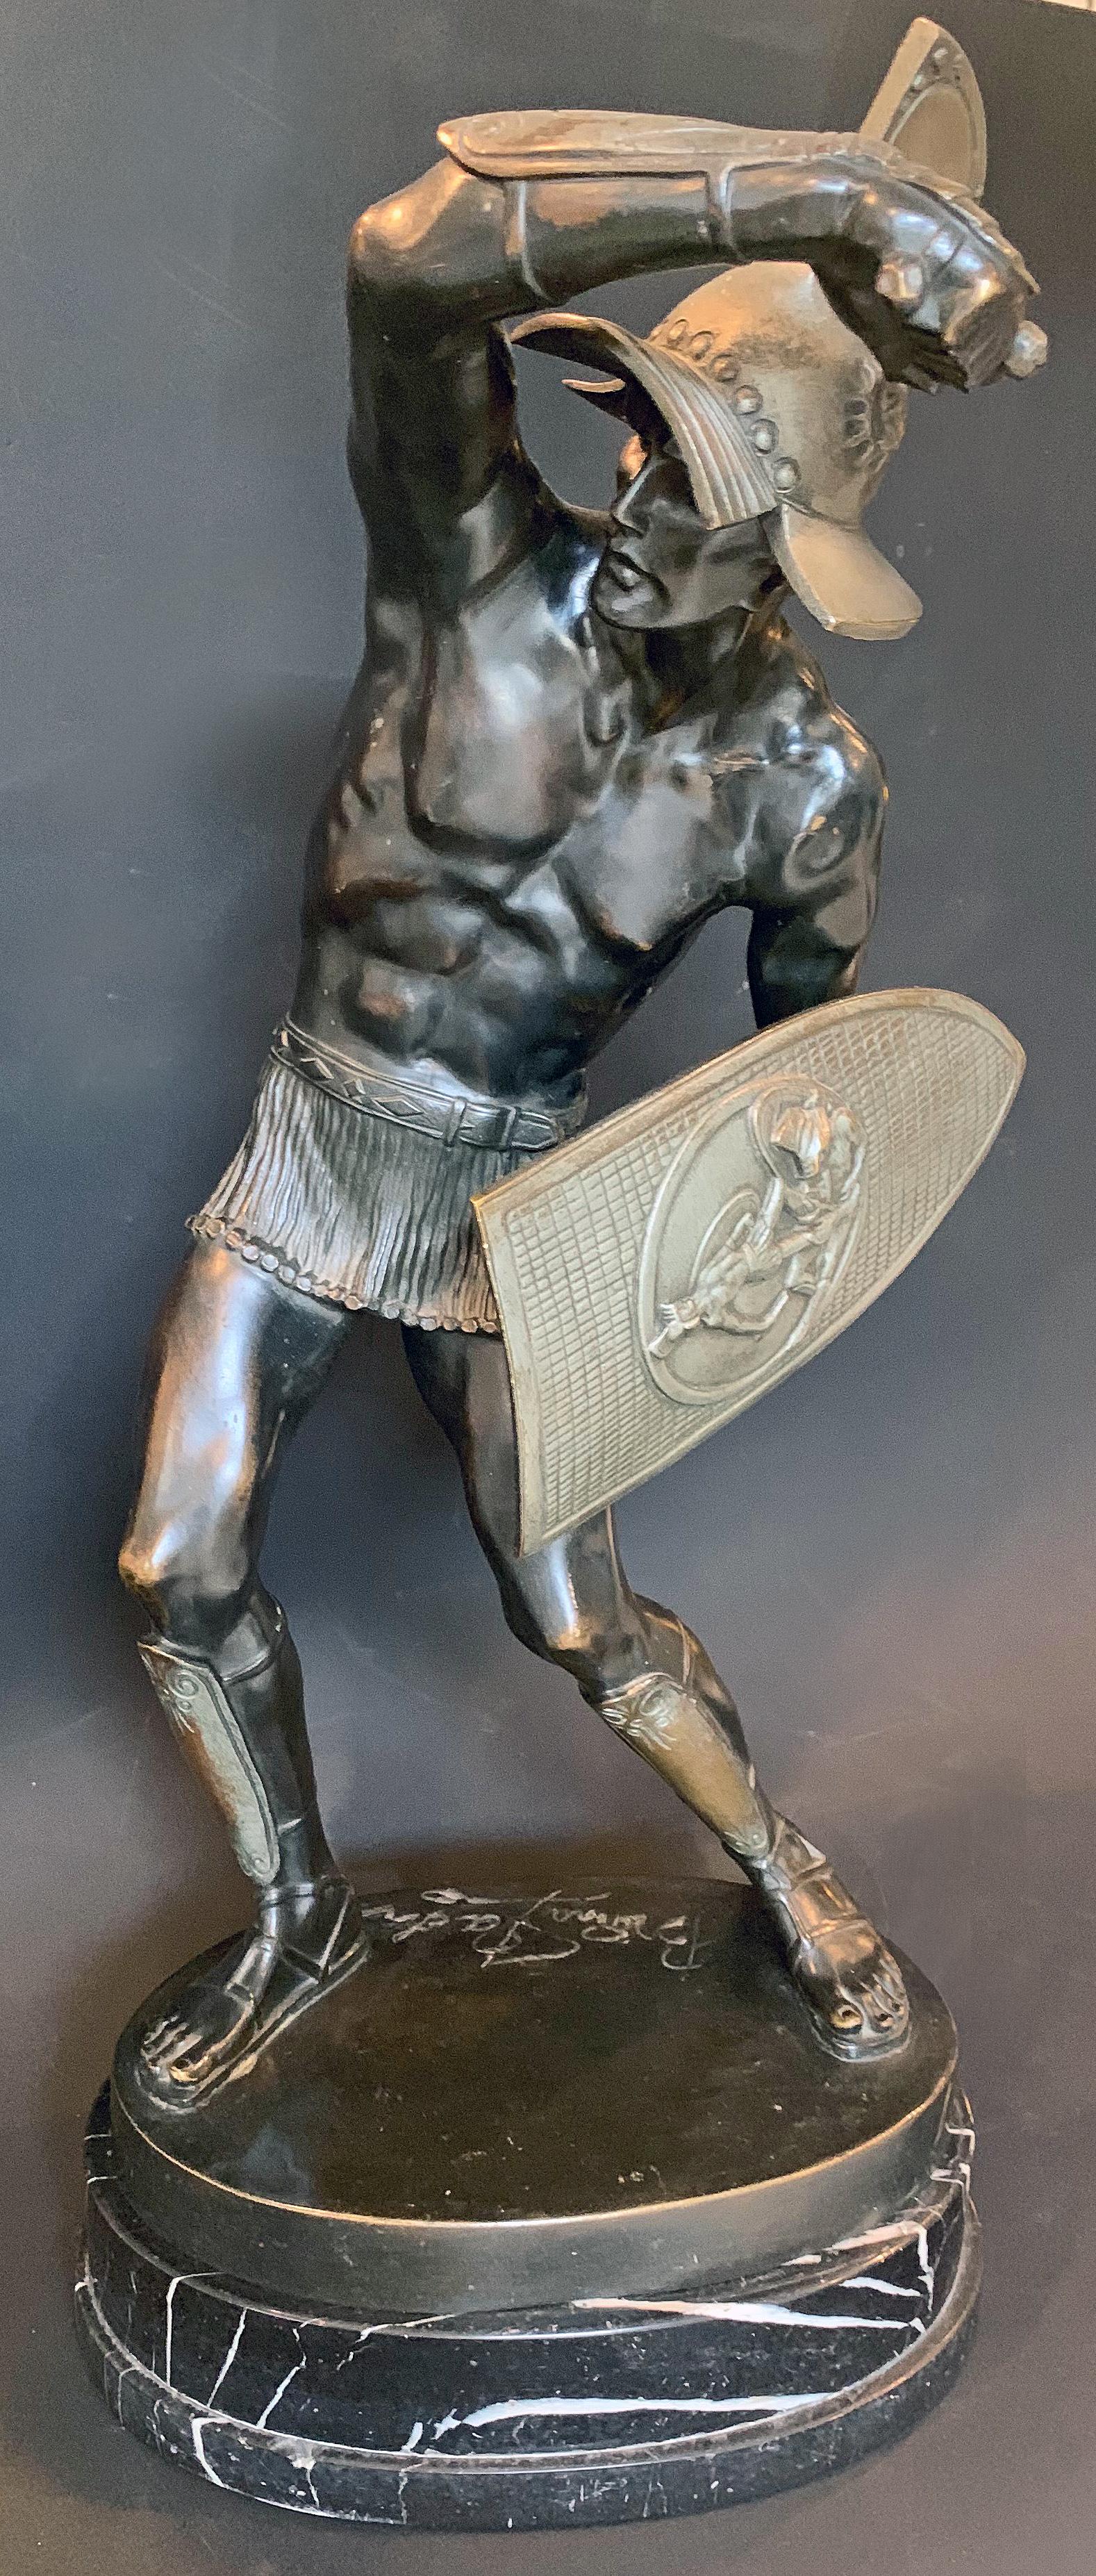 The first example of this sculpture we have seen, this striking depiction of a male gladiator -- clothed in nothing but a short mail skirt - is shown in the midst of battle, one arm raised with dagger in hand, the other holding a shield decorated